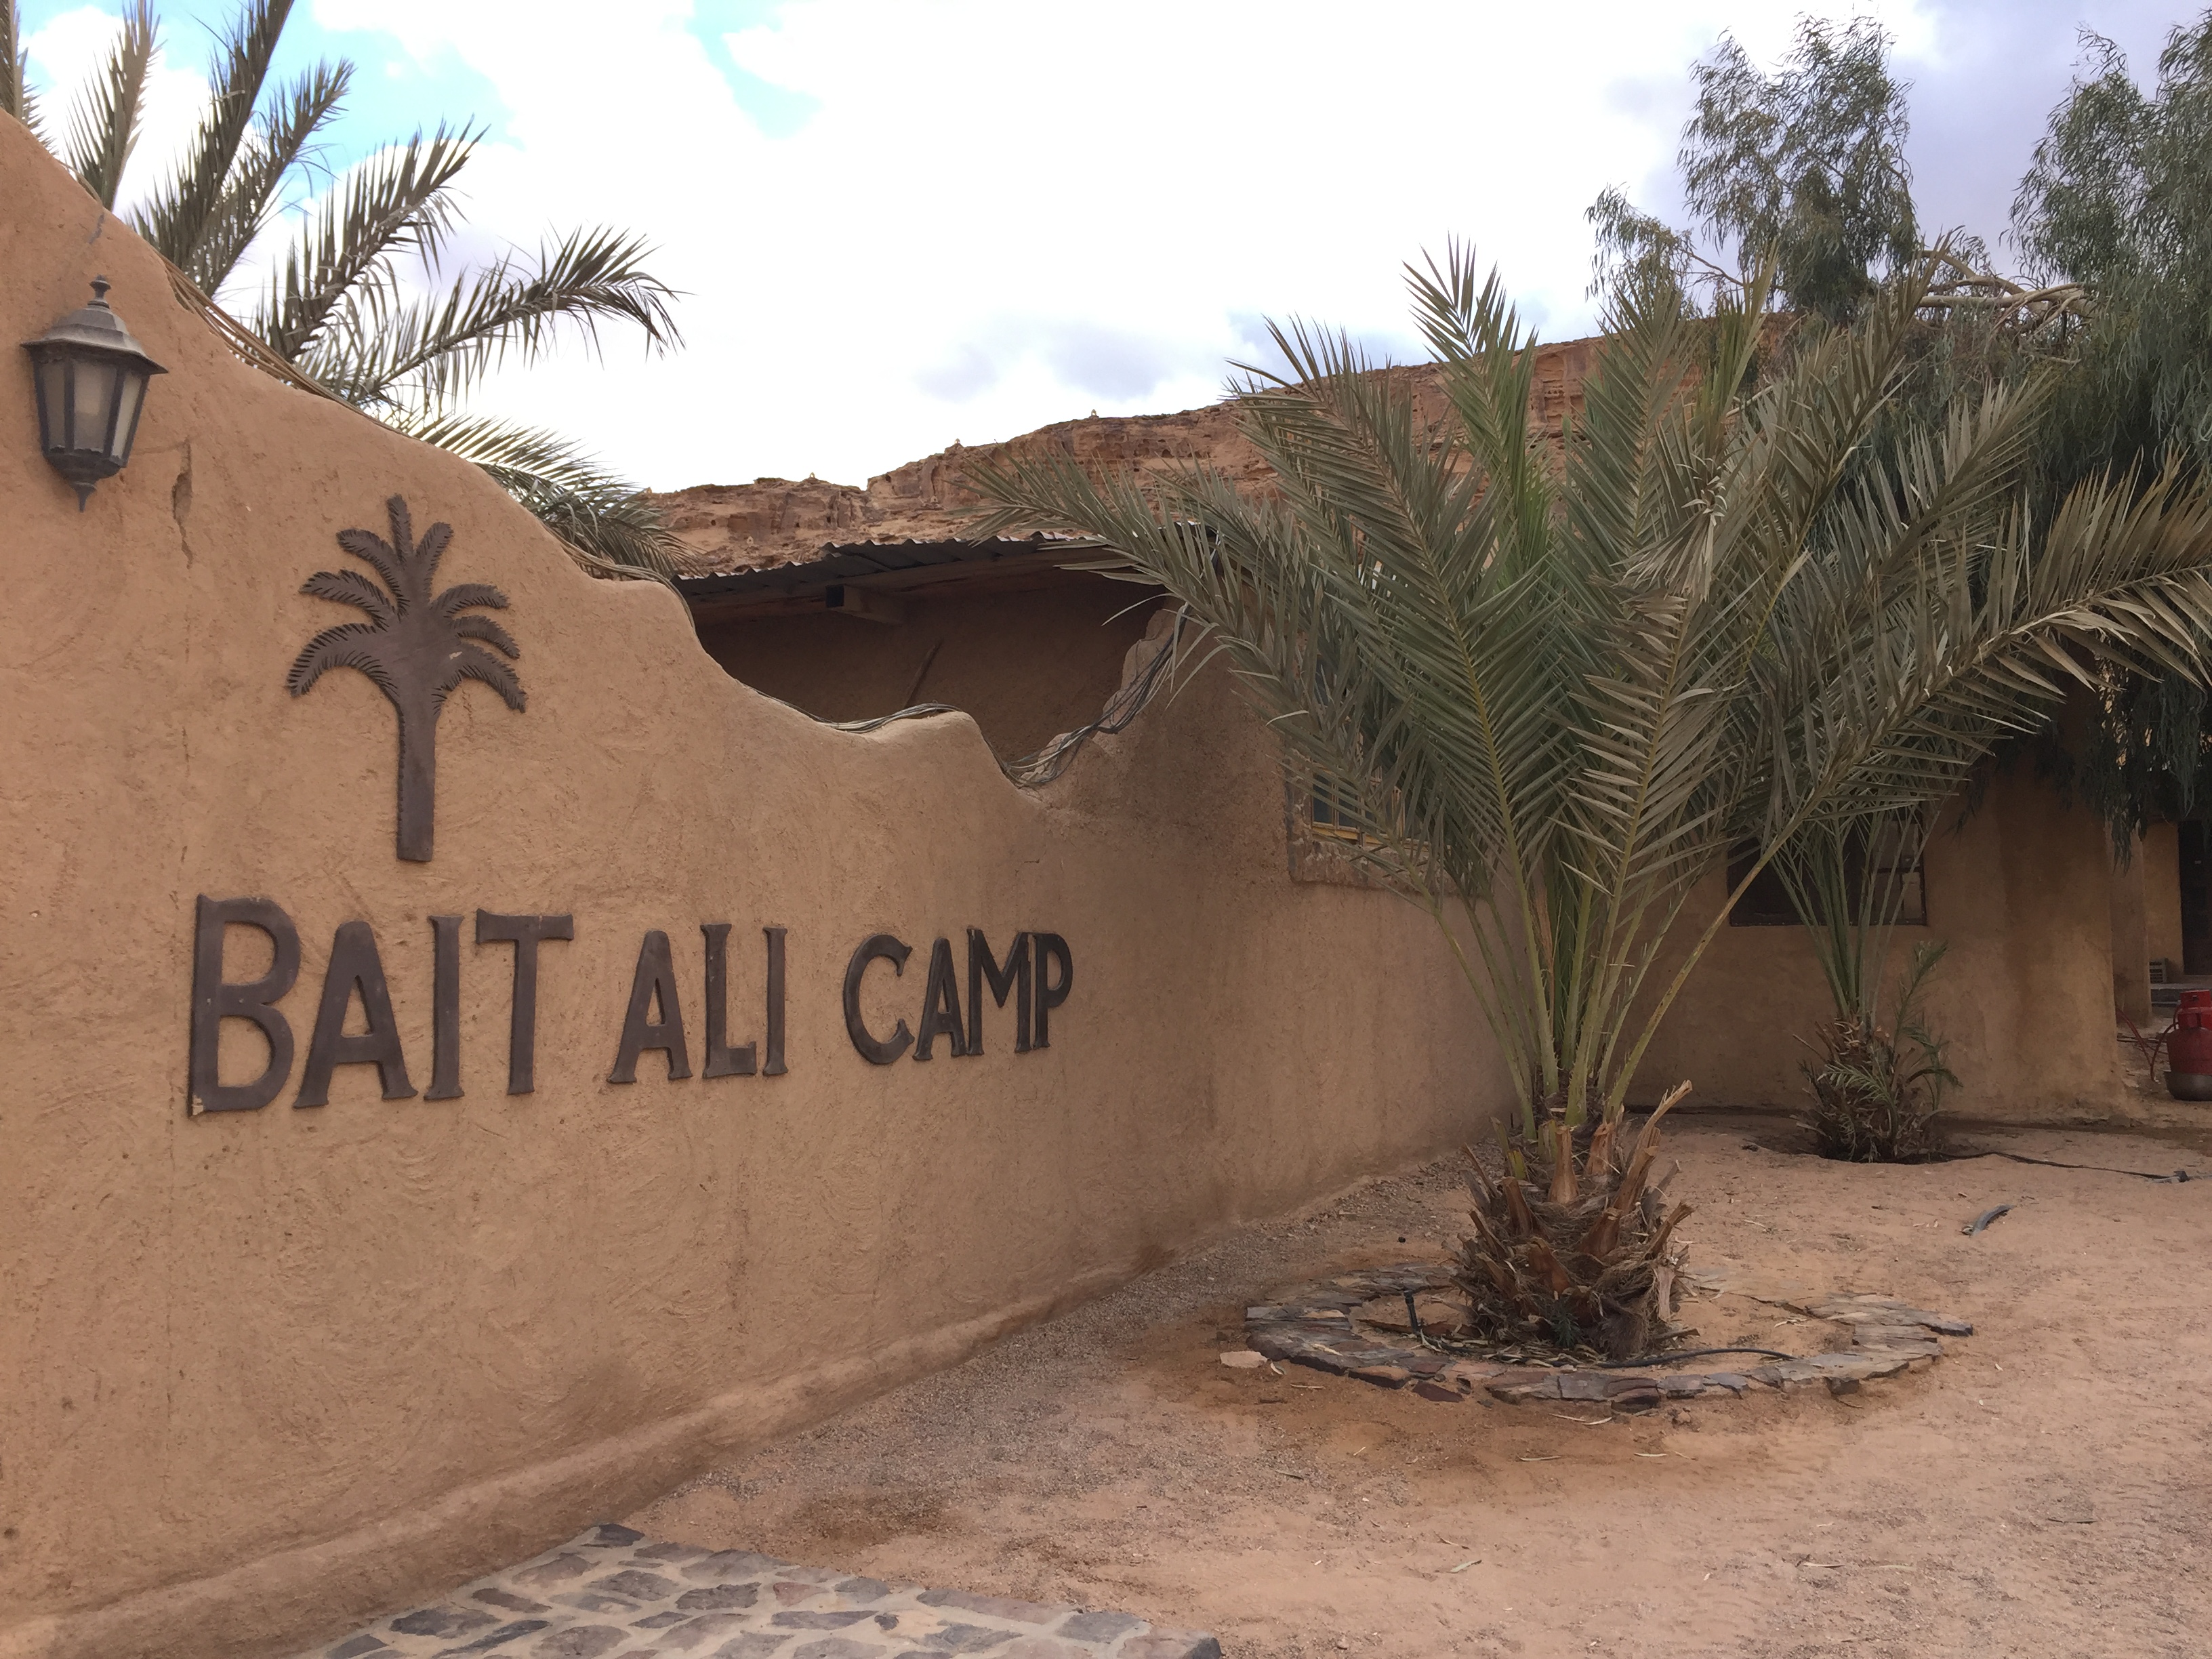 Arriving to Bait Ali camp